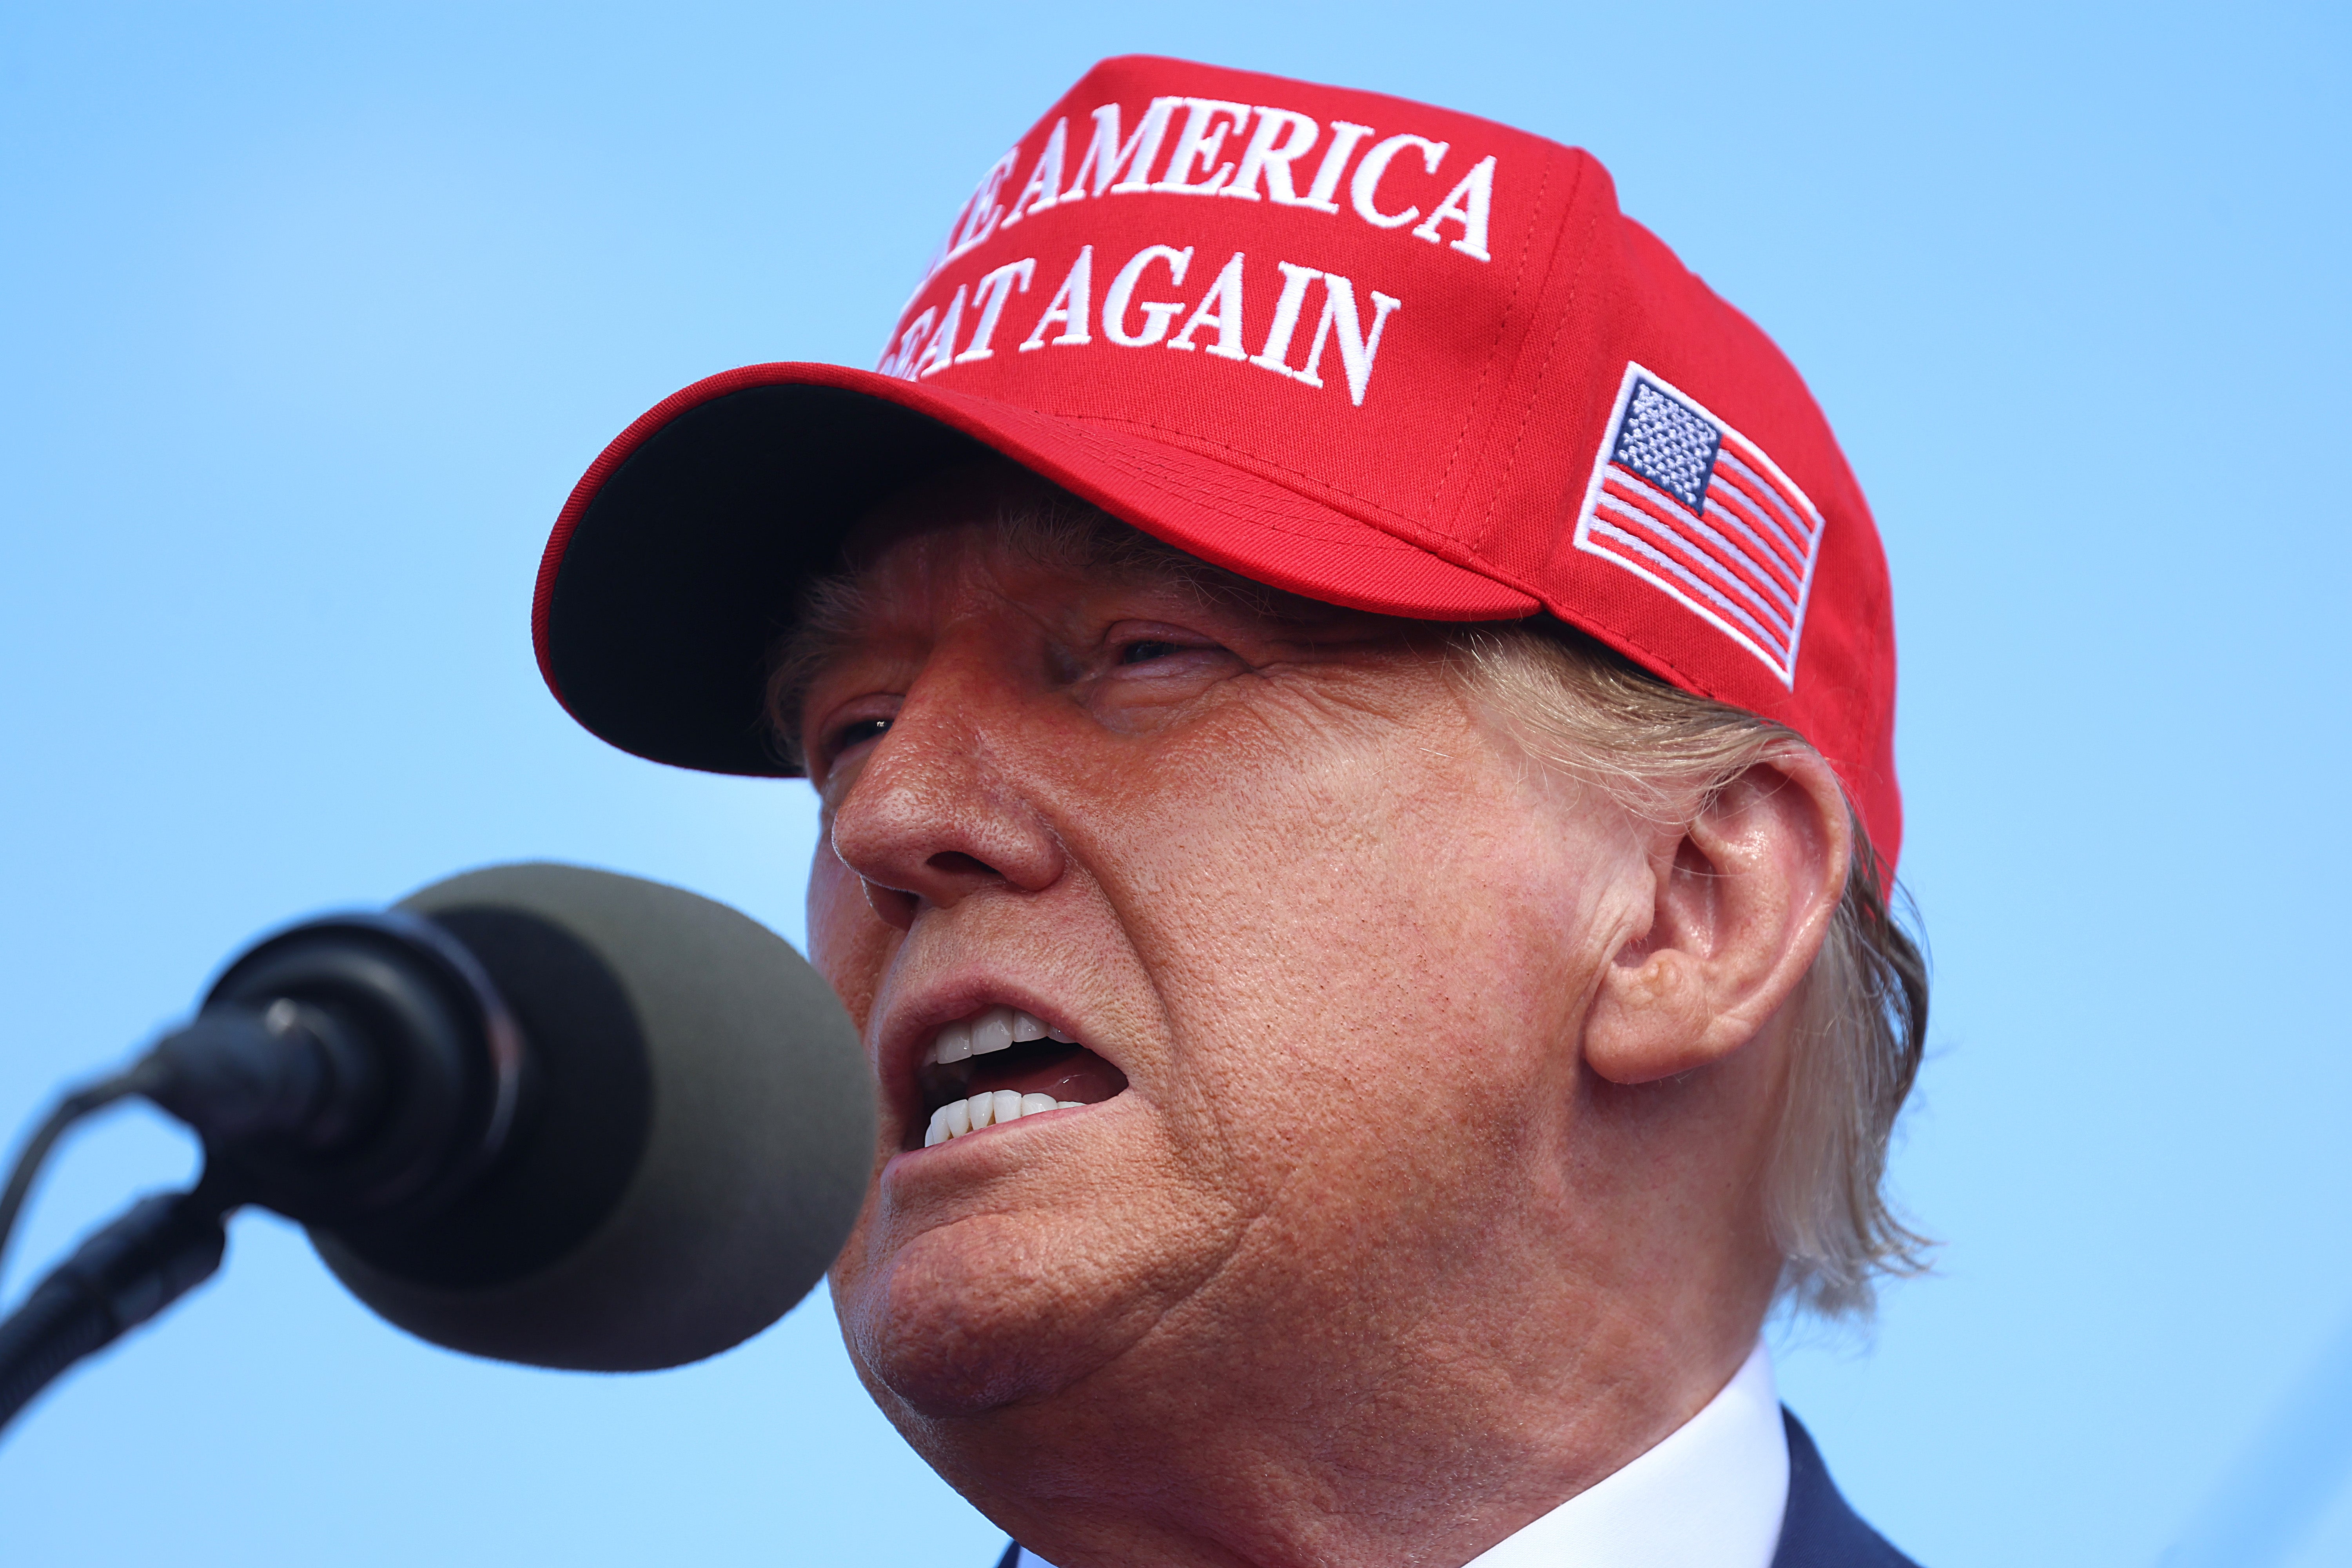 Donald Trump, pictured, speaks during a campaign rally on June 18. His media company is facing a difficult month, with share prices dropping more than 40% in the last three weeks.